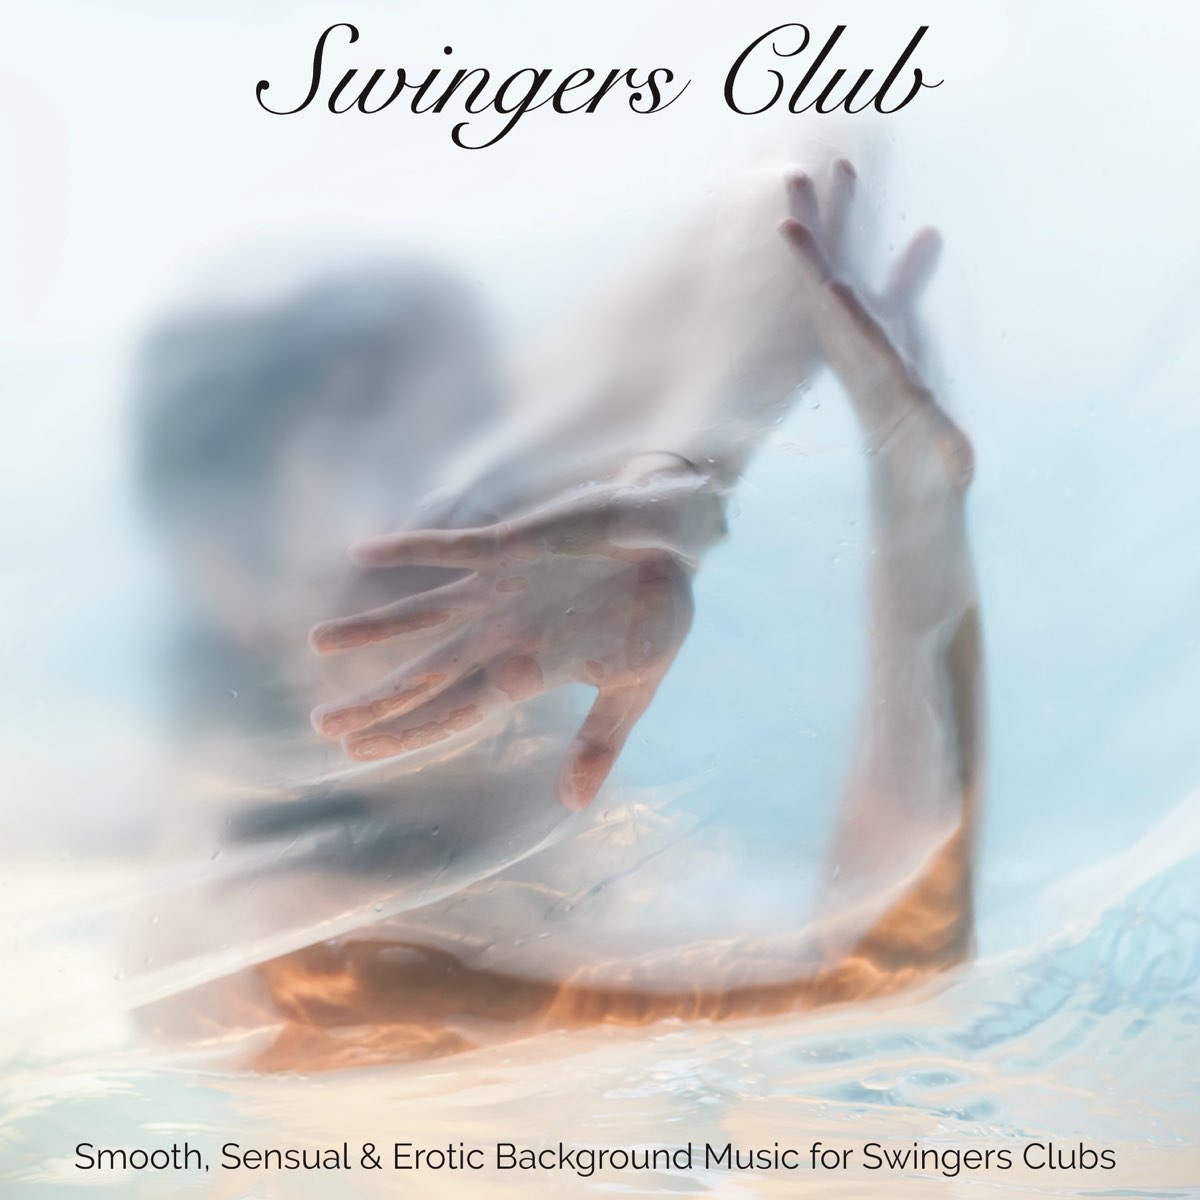 Swingers Club Smooth, Sensual and Erotic Background Music for Swingers Clubs - Album by Erotic Lounge Buddha Chill Out Music Cafe picture